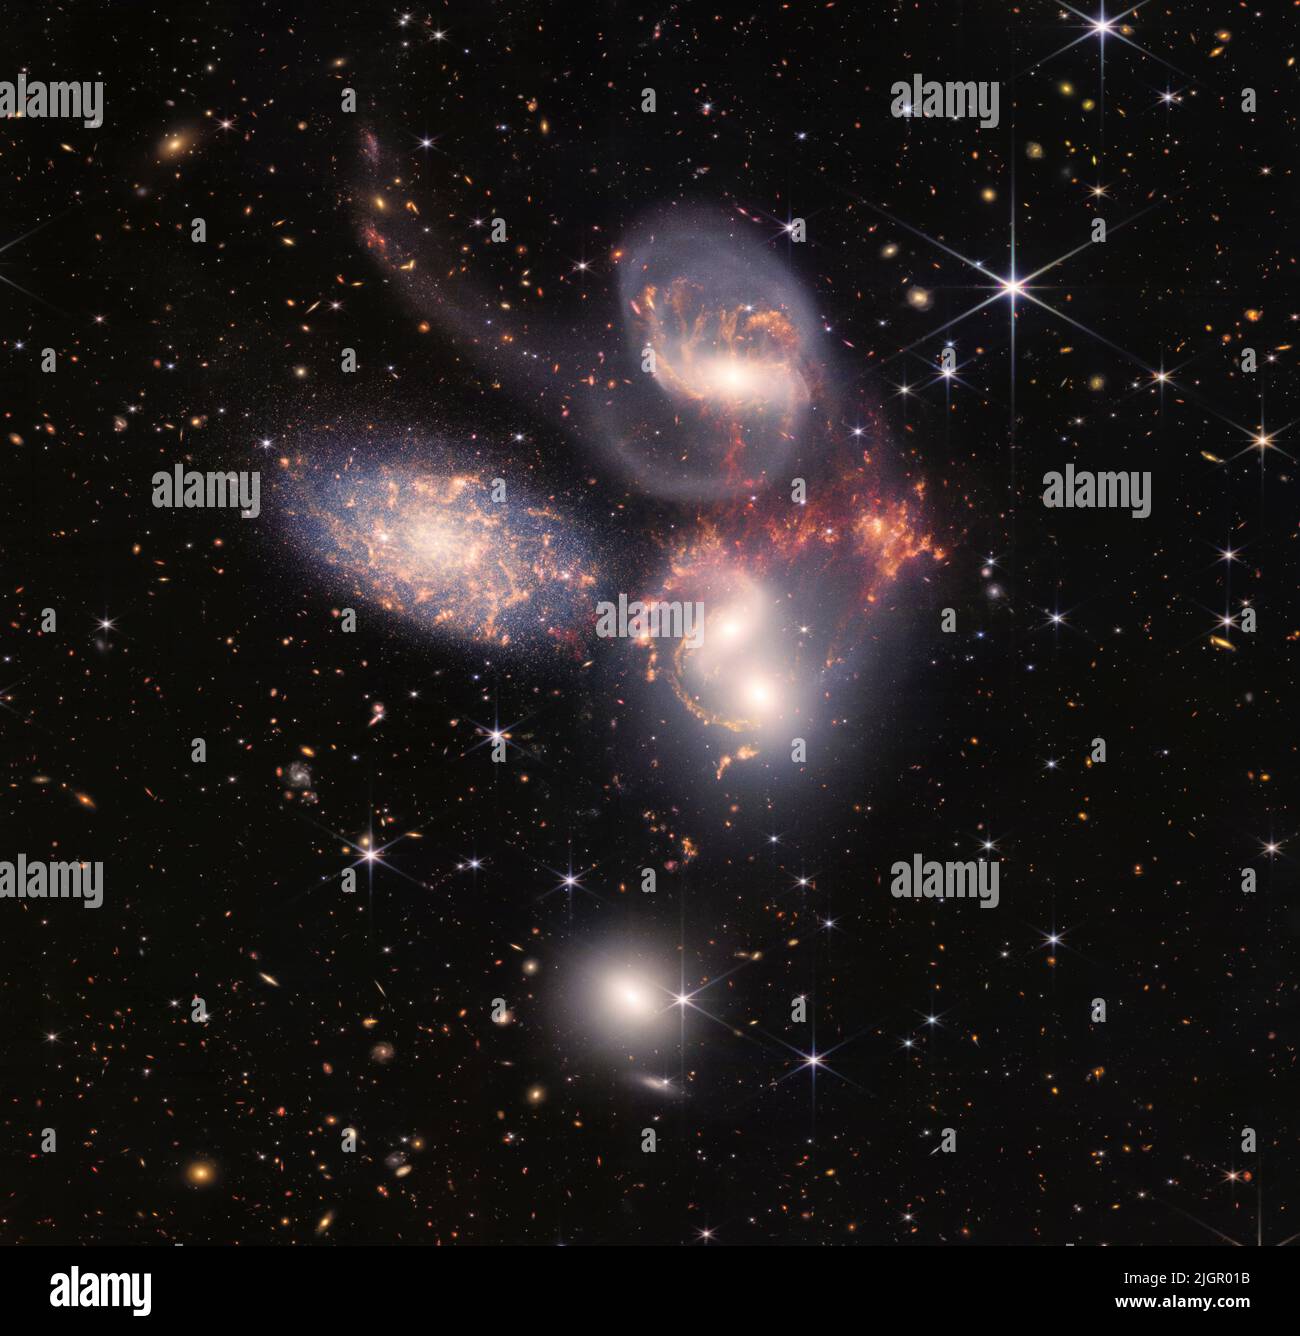 James Webb Space Telescope’s first images – Highest resolution version of a NASA composite image showing the galaxy group called “Stephan’s Quintet.” The close proximity of this group gives astronomers a ringside seat to galactic mergers and interactions. Stephan’s Quintet is a fantastic “laboratory” for studying processes fundamental to all galaxies. The image also shows outflows driven by a supermassive black hole in one of the group’s galaxies in a level of detail never seen before.  12 July 2022Credit: NASA, ESA, CSA, and STScI / Alamy Live News via Digitaleye Stock Photo